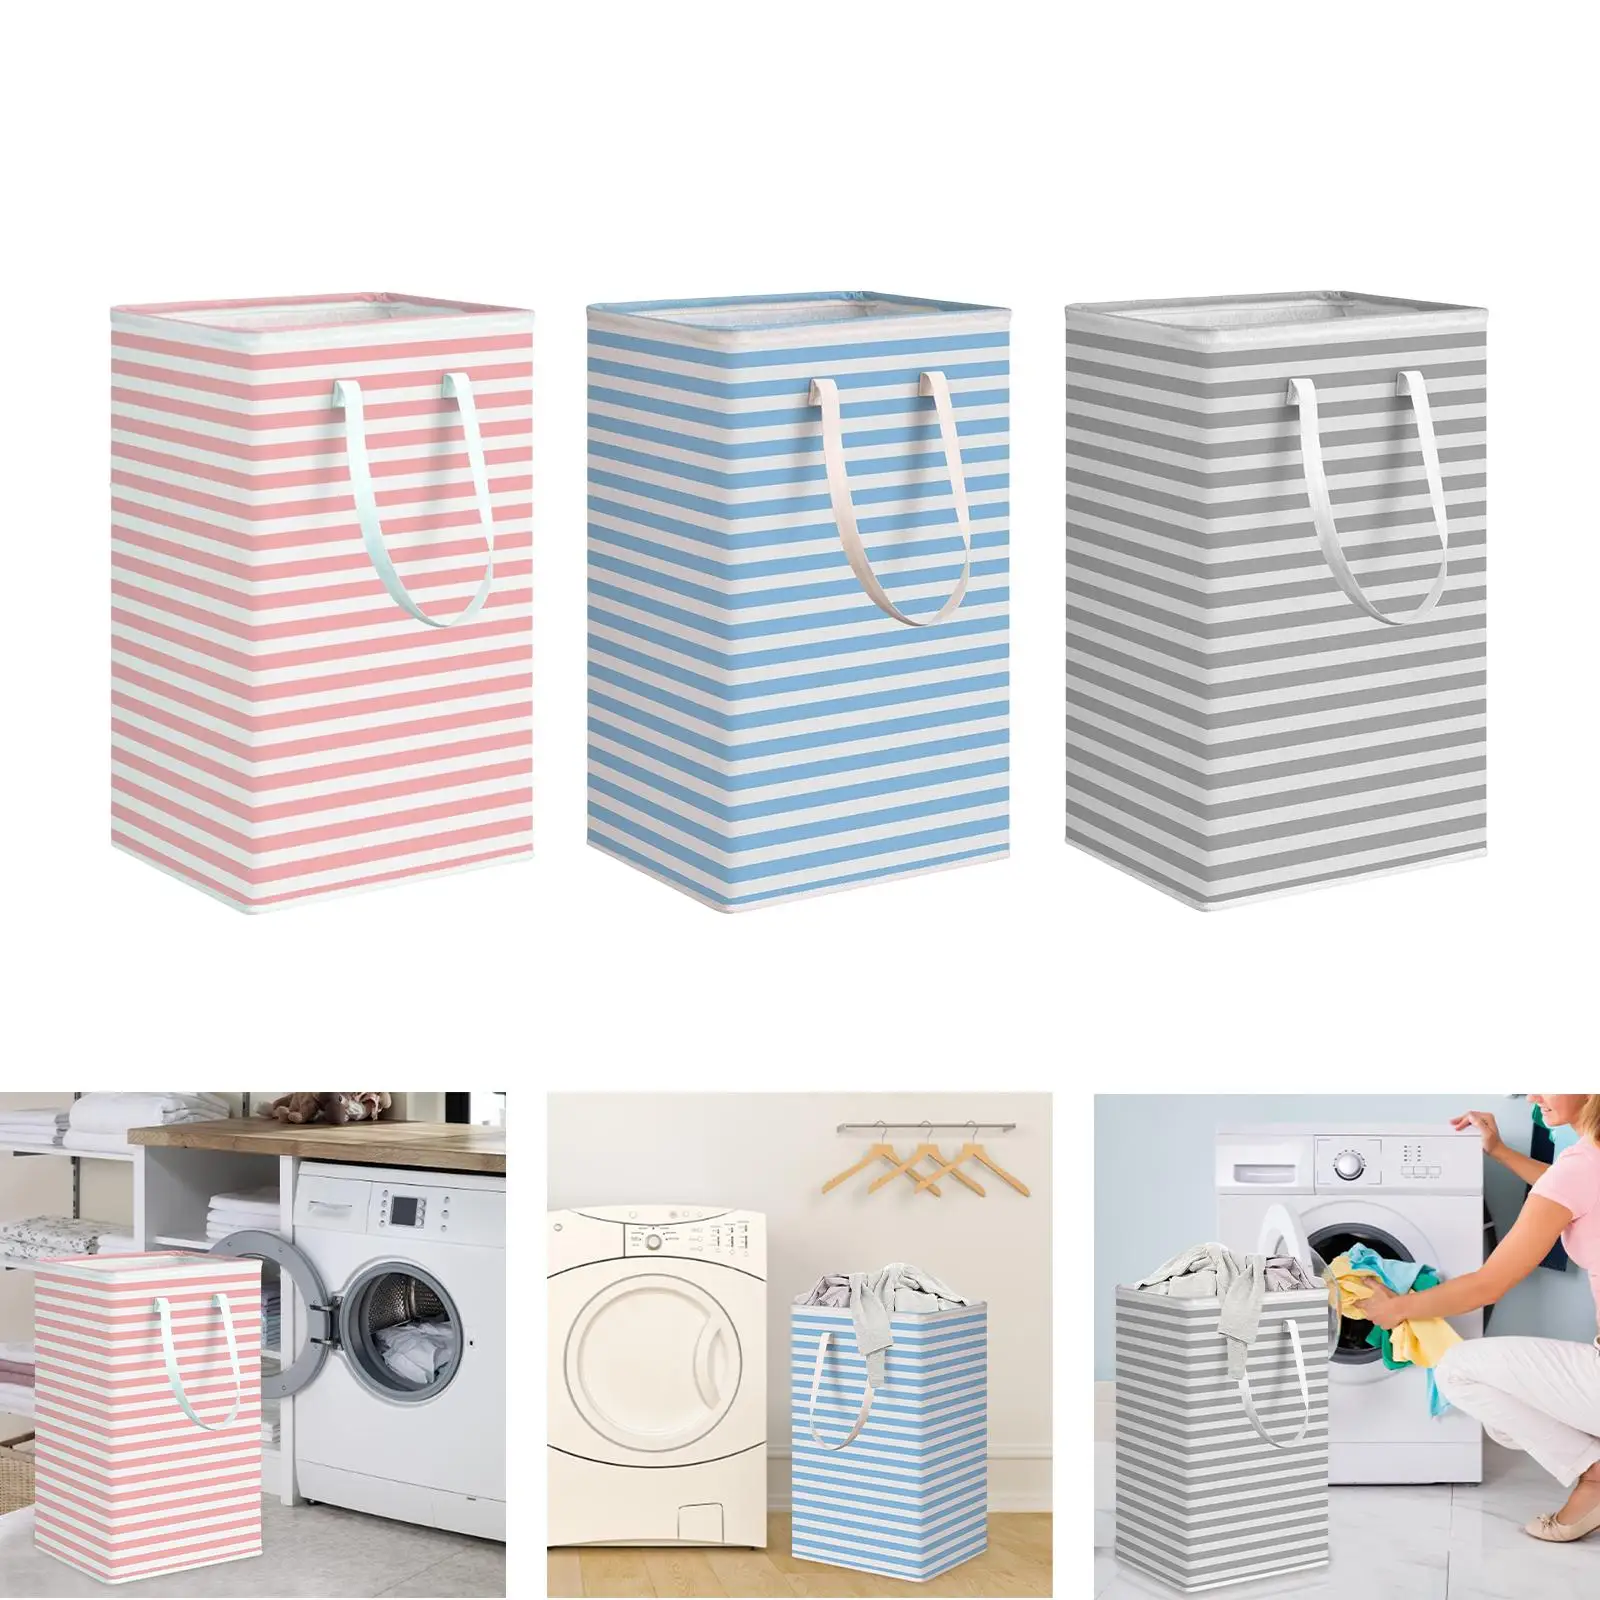 Dirty Clothes Laundry Basket with Easy Carry Handles 75L Collapsible Large Laundry Basket for Apartments Dorm Bedroom Hotel